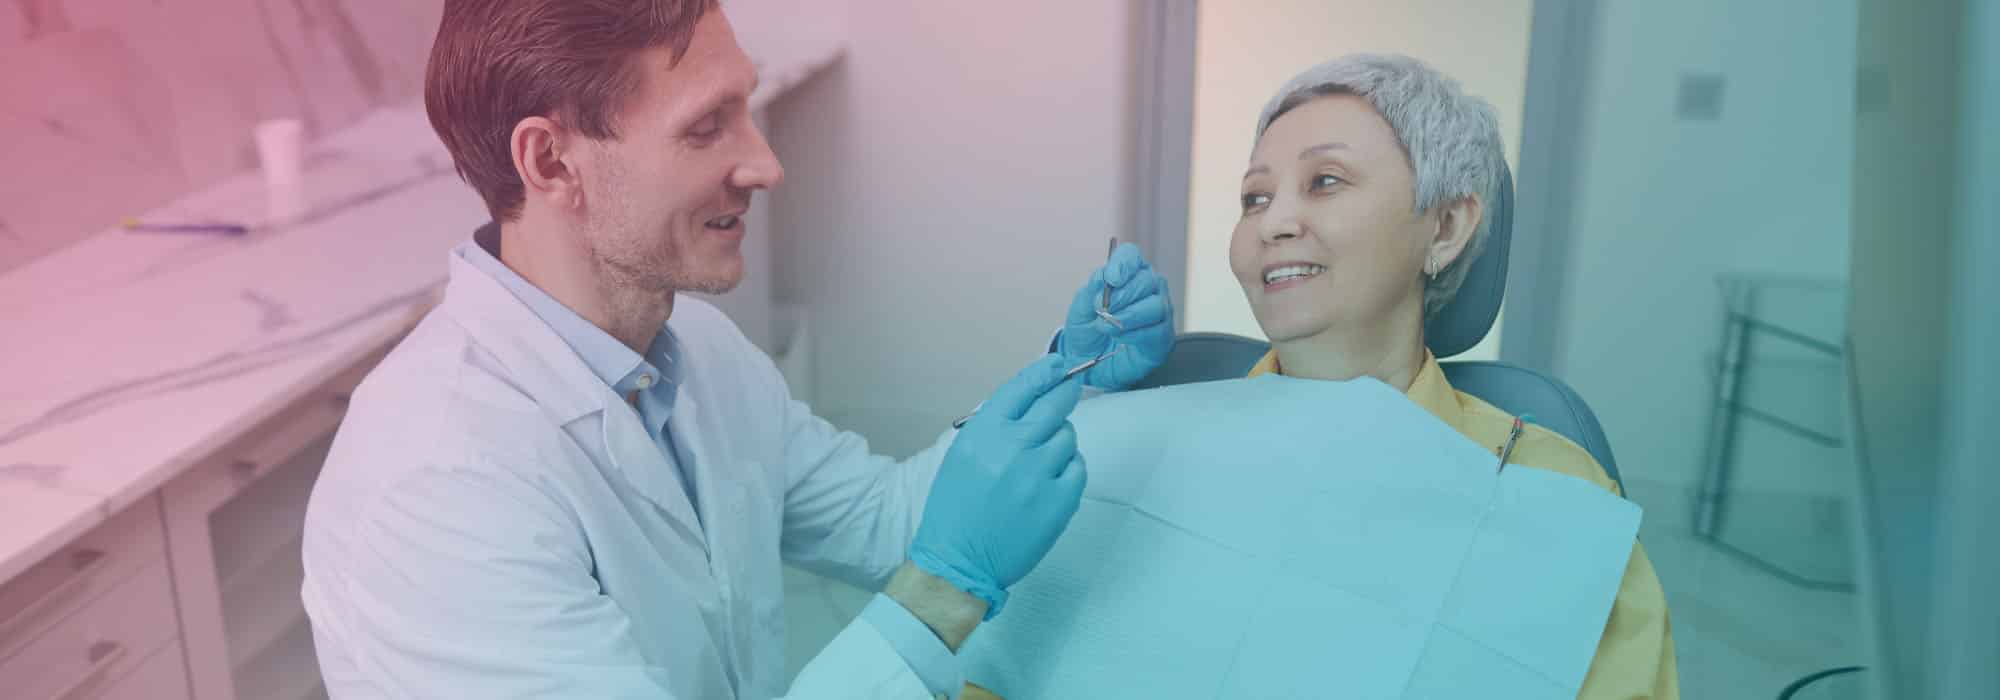 Find the Best Dentists for Seniors Near You